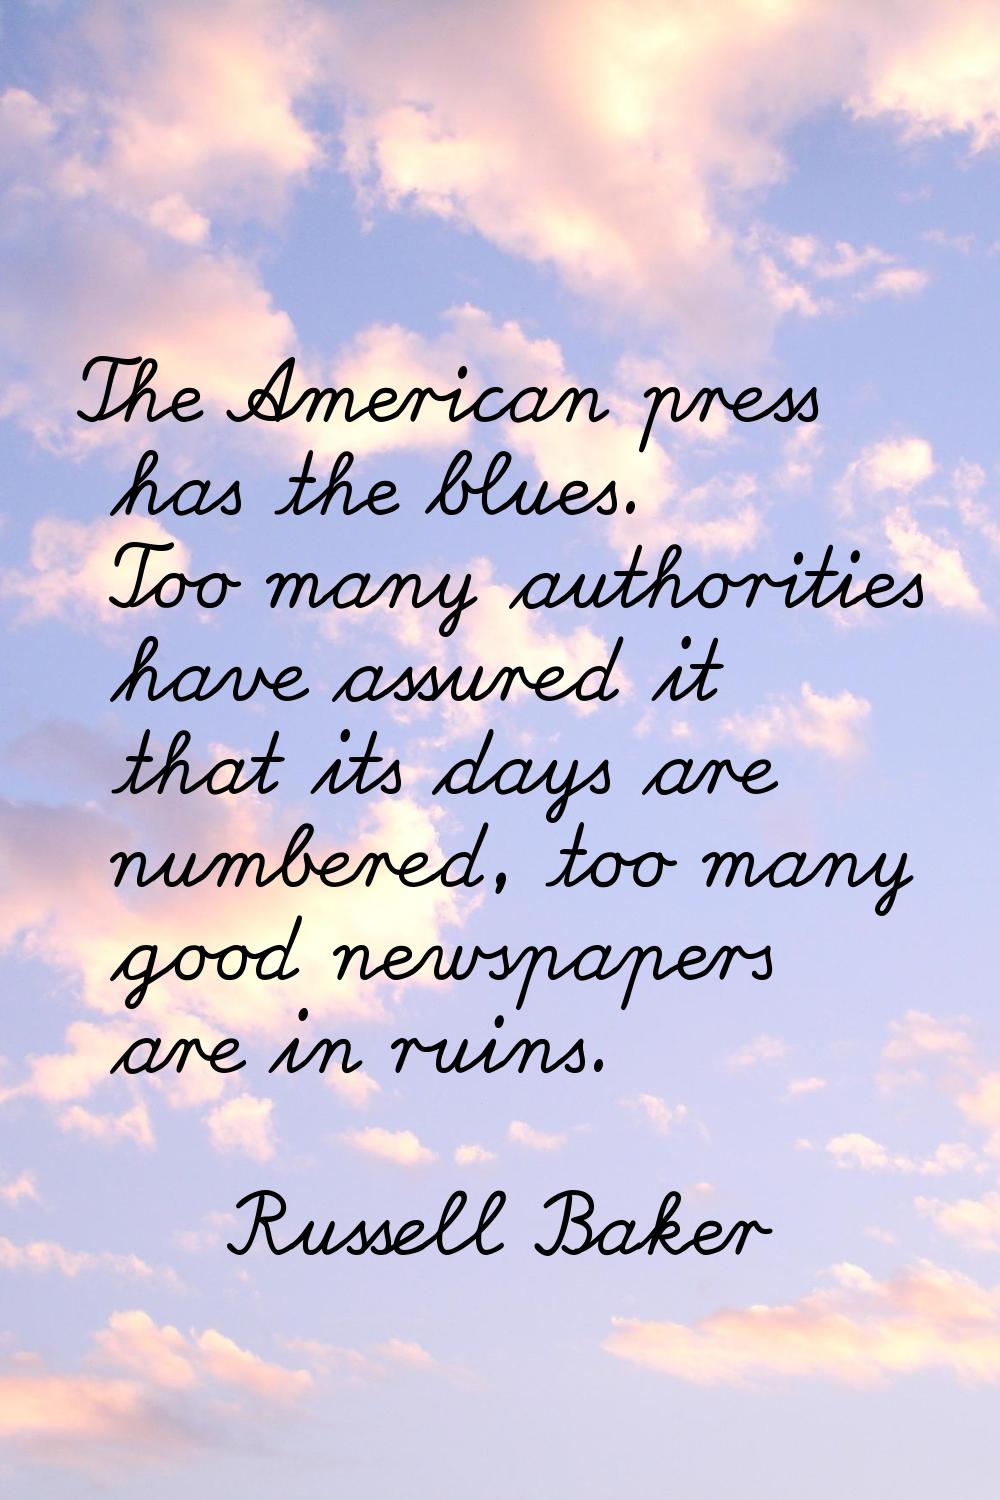 The American press has the blues. Too many authorities have assured it that its days are numbered, 